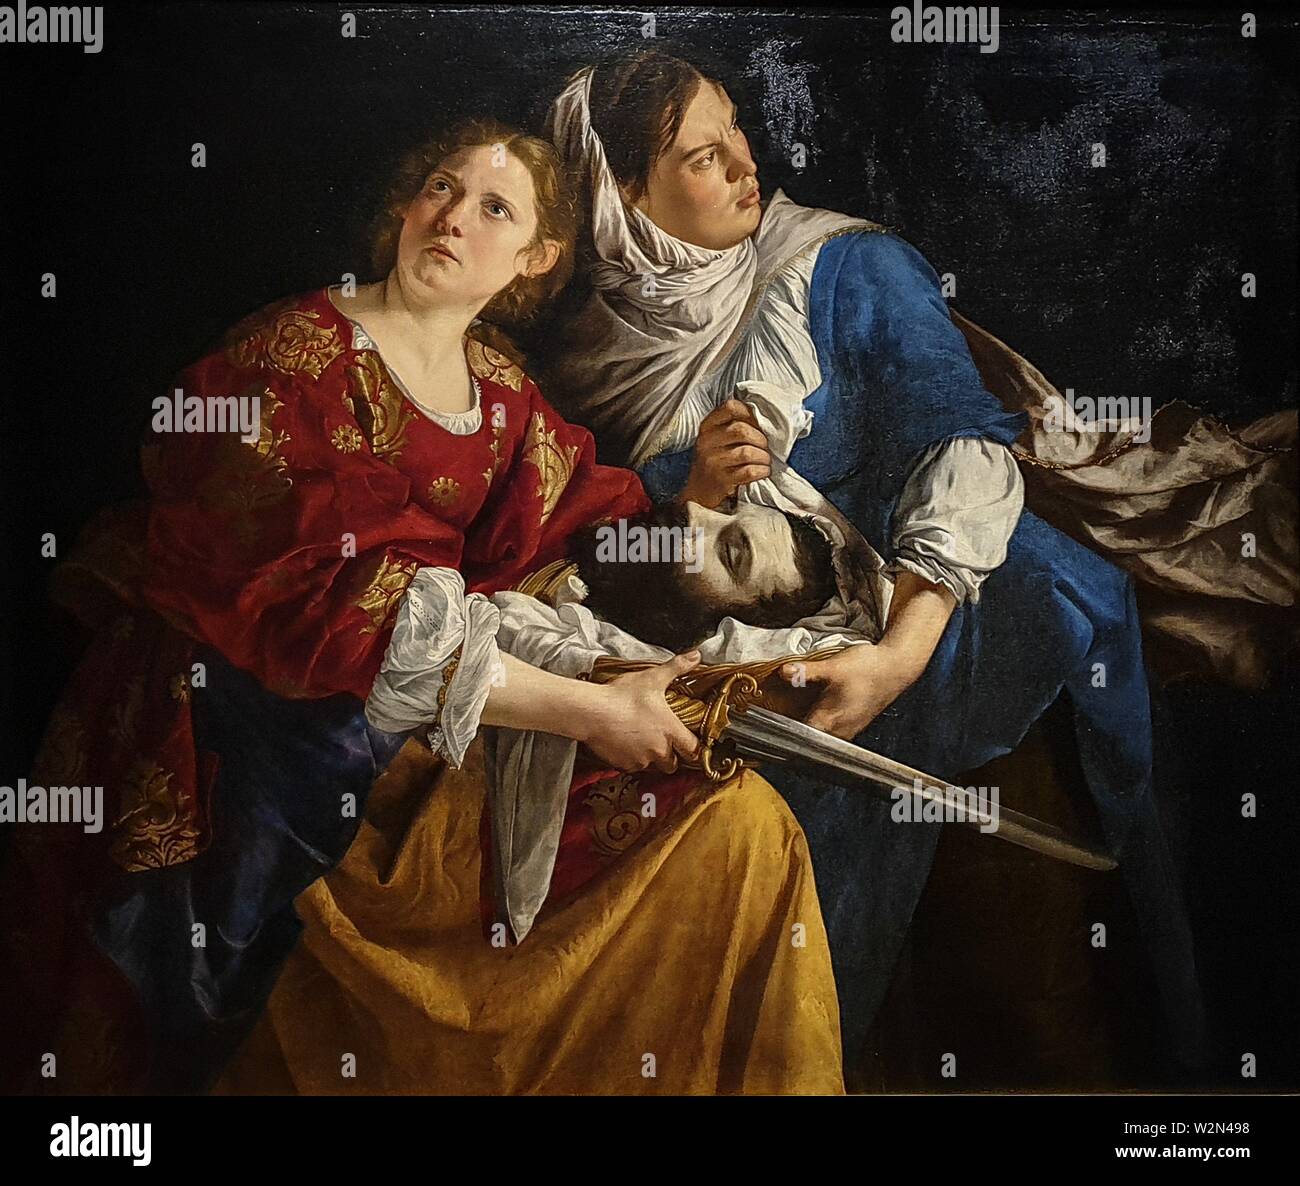 'Judith and Her Maidservant with the Head of Holofernes', 1621/24, by Orazio Gentileschi (1588-1629) Stock Photo